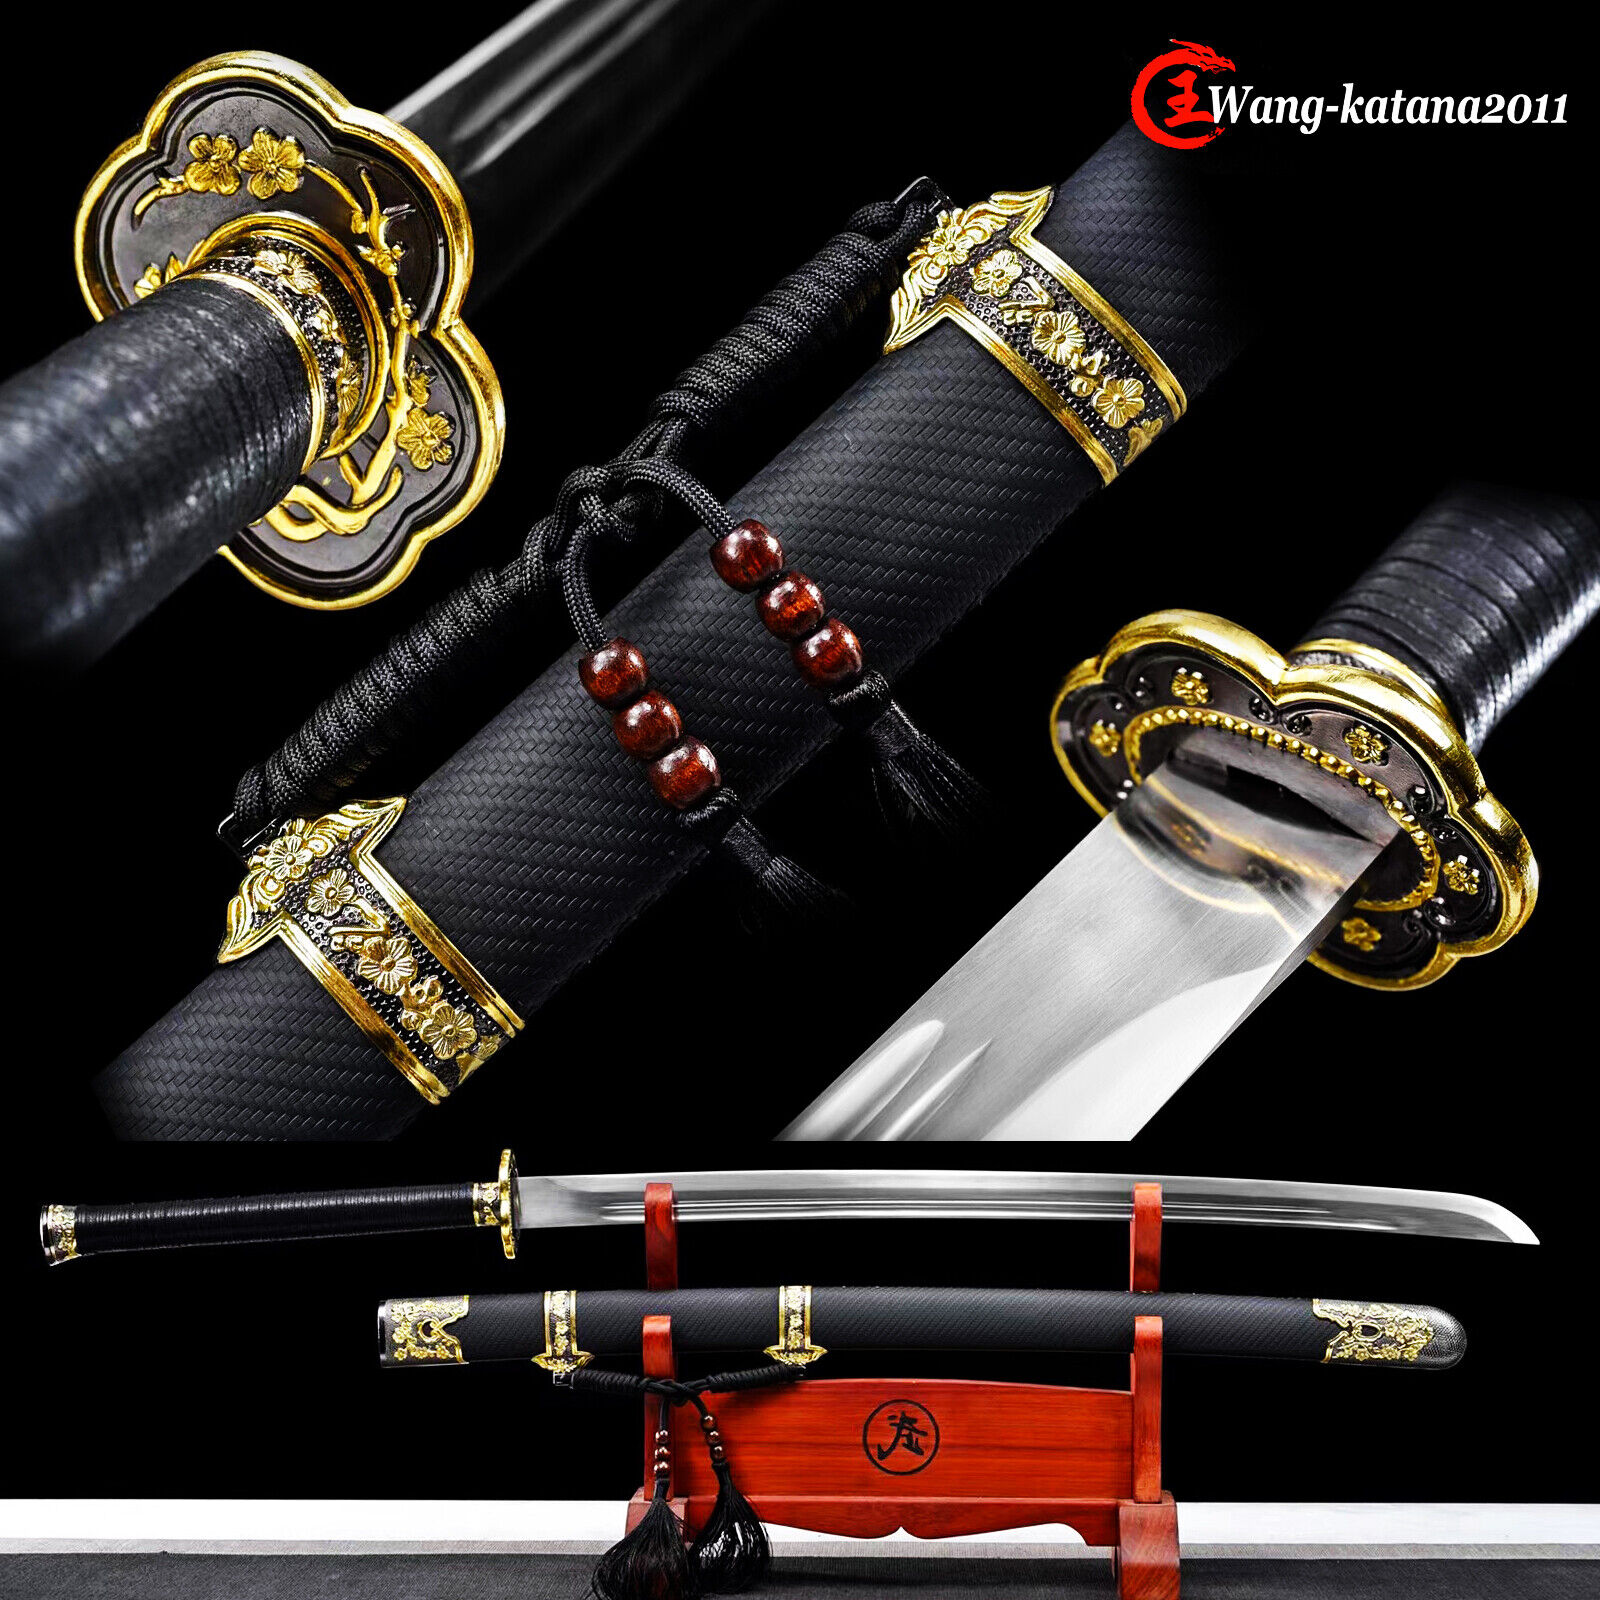 44''Chinese Brotherhood of Blades Combating Dao 1095 Steel Ming Dynasty Sword